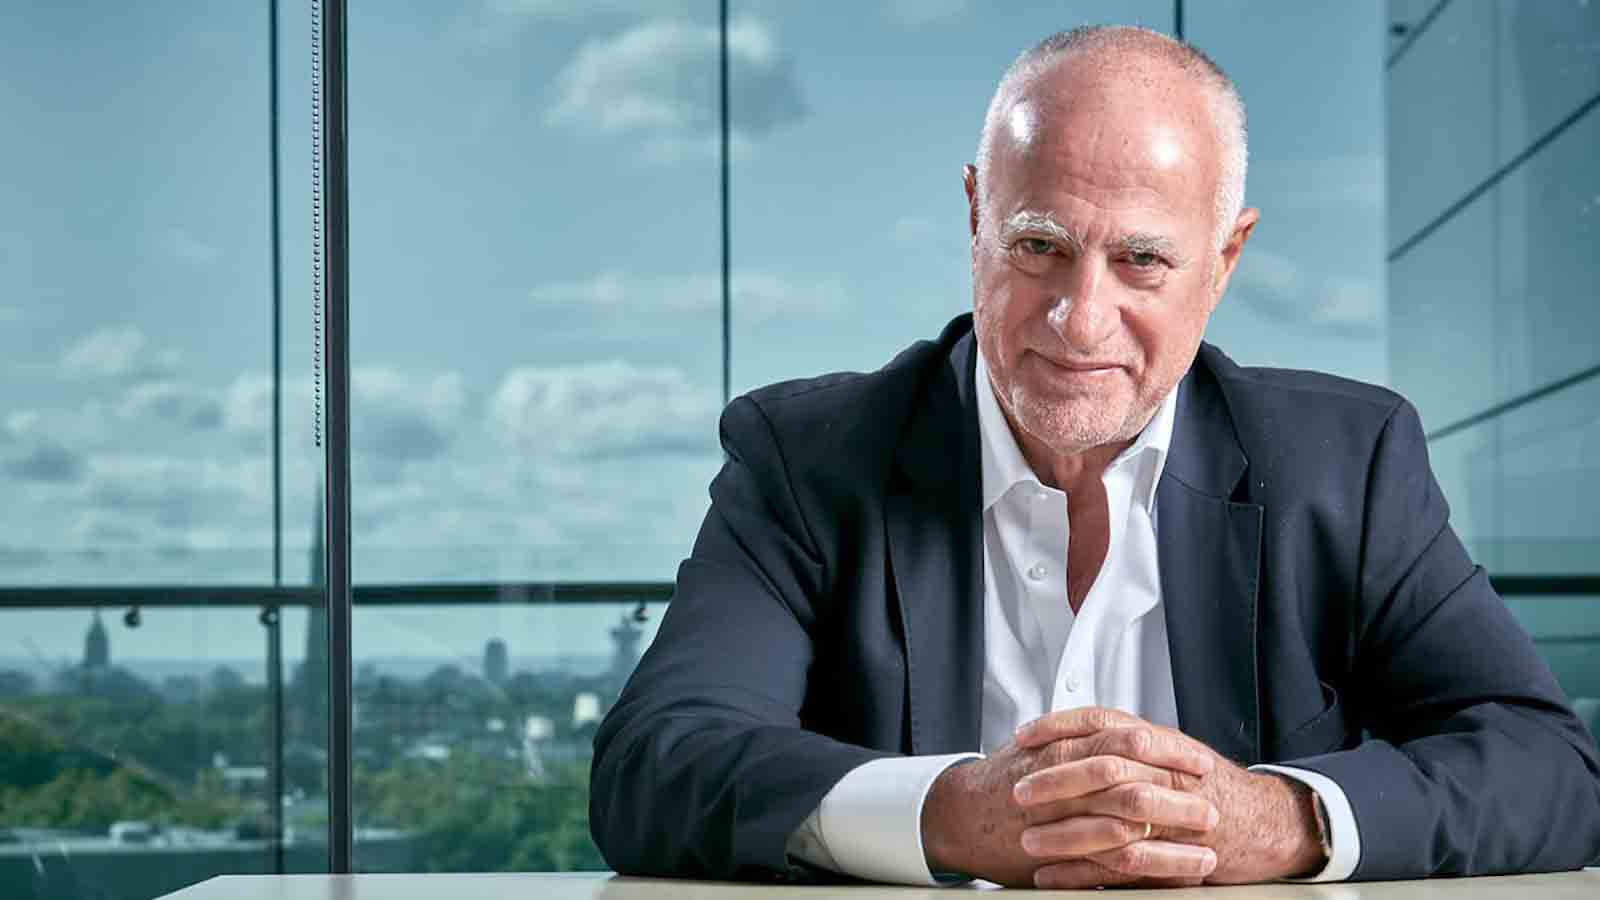 Michael Joseph lends his expertise to Kenyan insurtech startup Pula, to lead its board